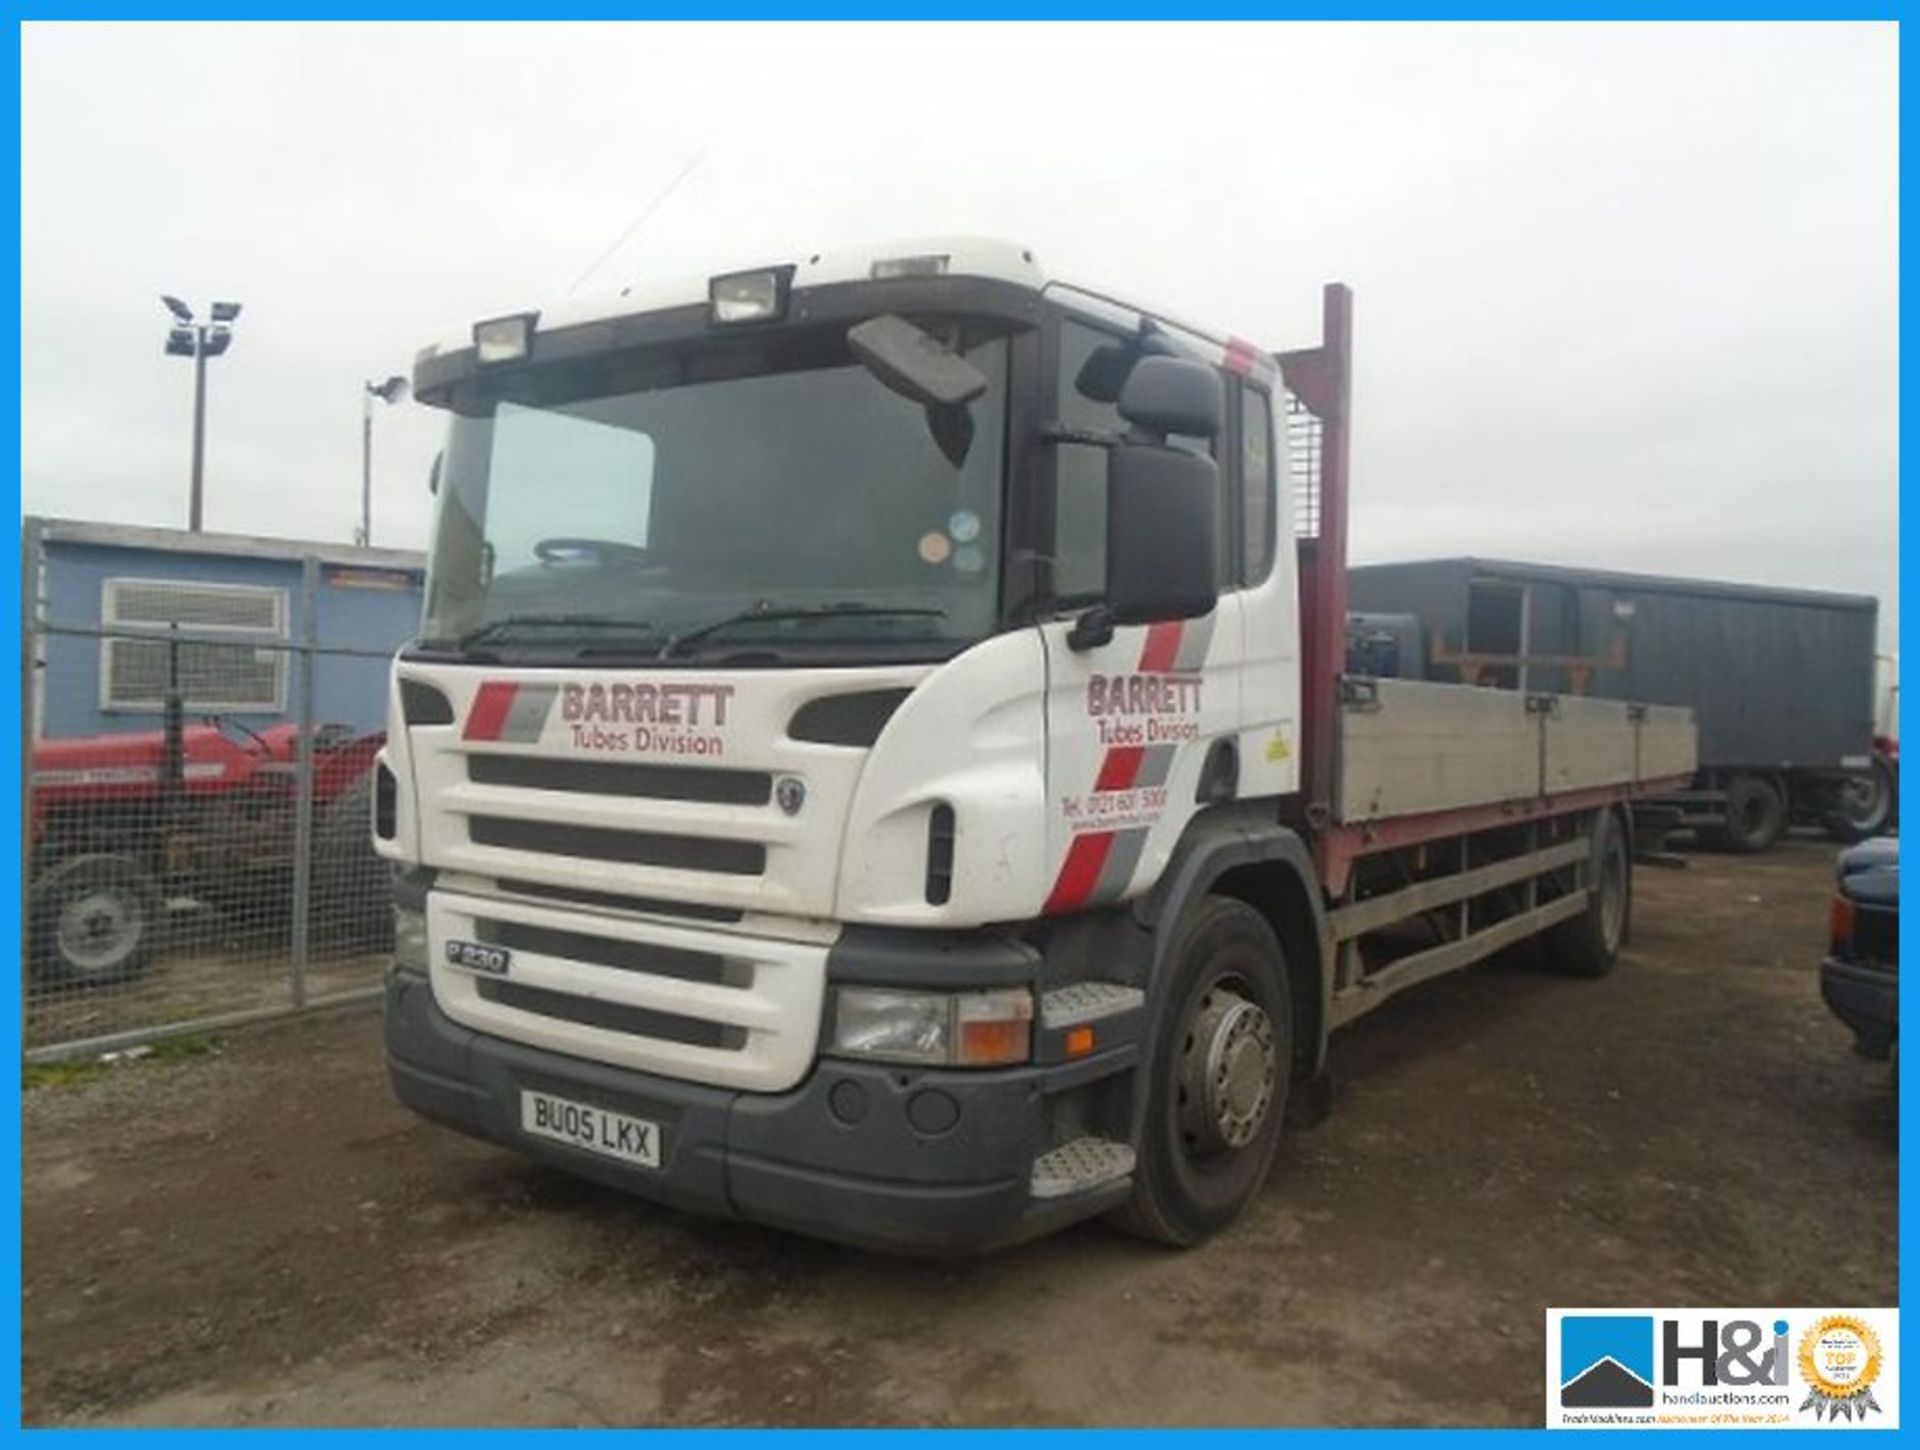 2005 SCANIA P230, 641973 KM, 27FT DROP SIDE BODY, MANUAL GEAR BOX, 4X2, DAY CAB, STEEL SUSPENSION, - Image 6 of 7